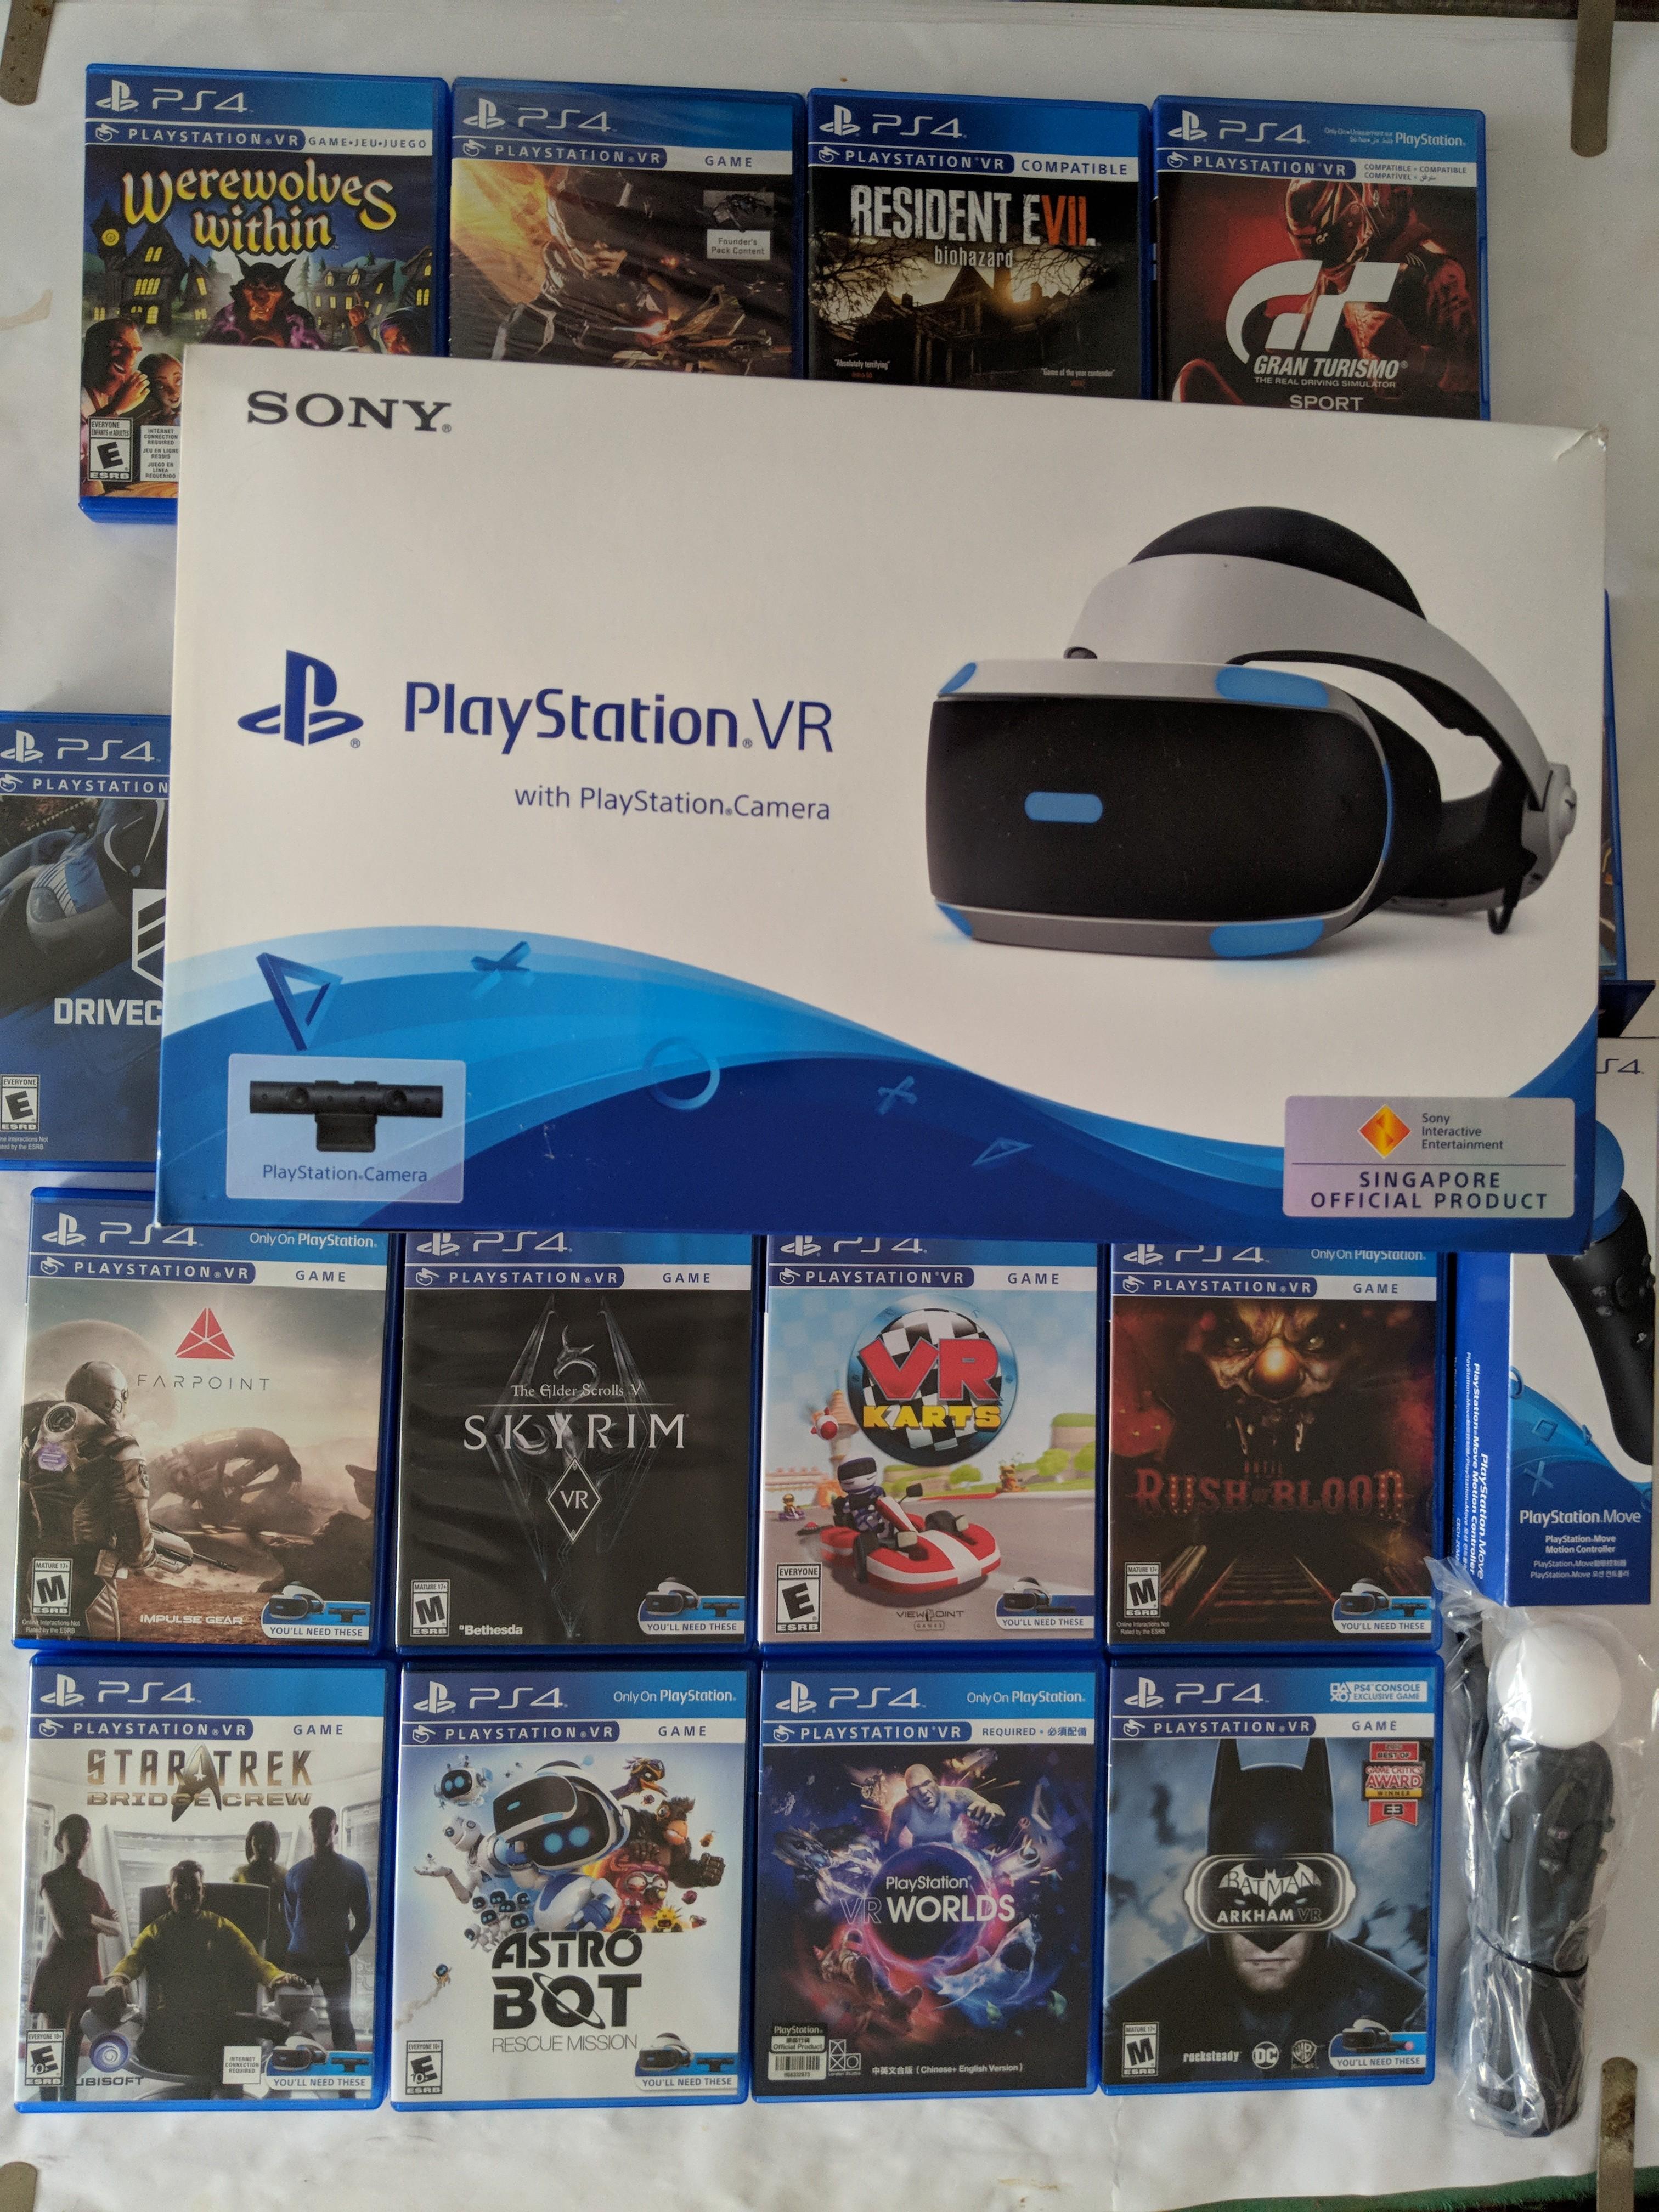 psvr on pc with move controllers